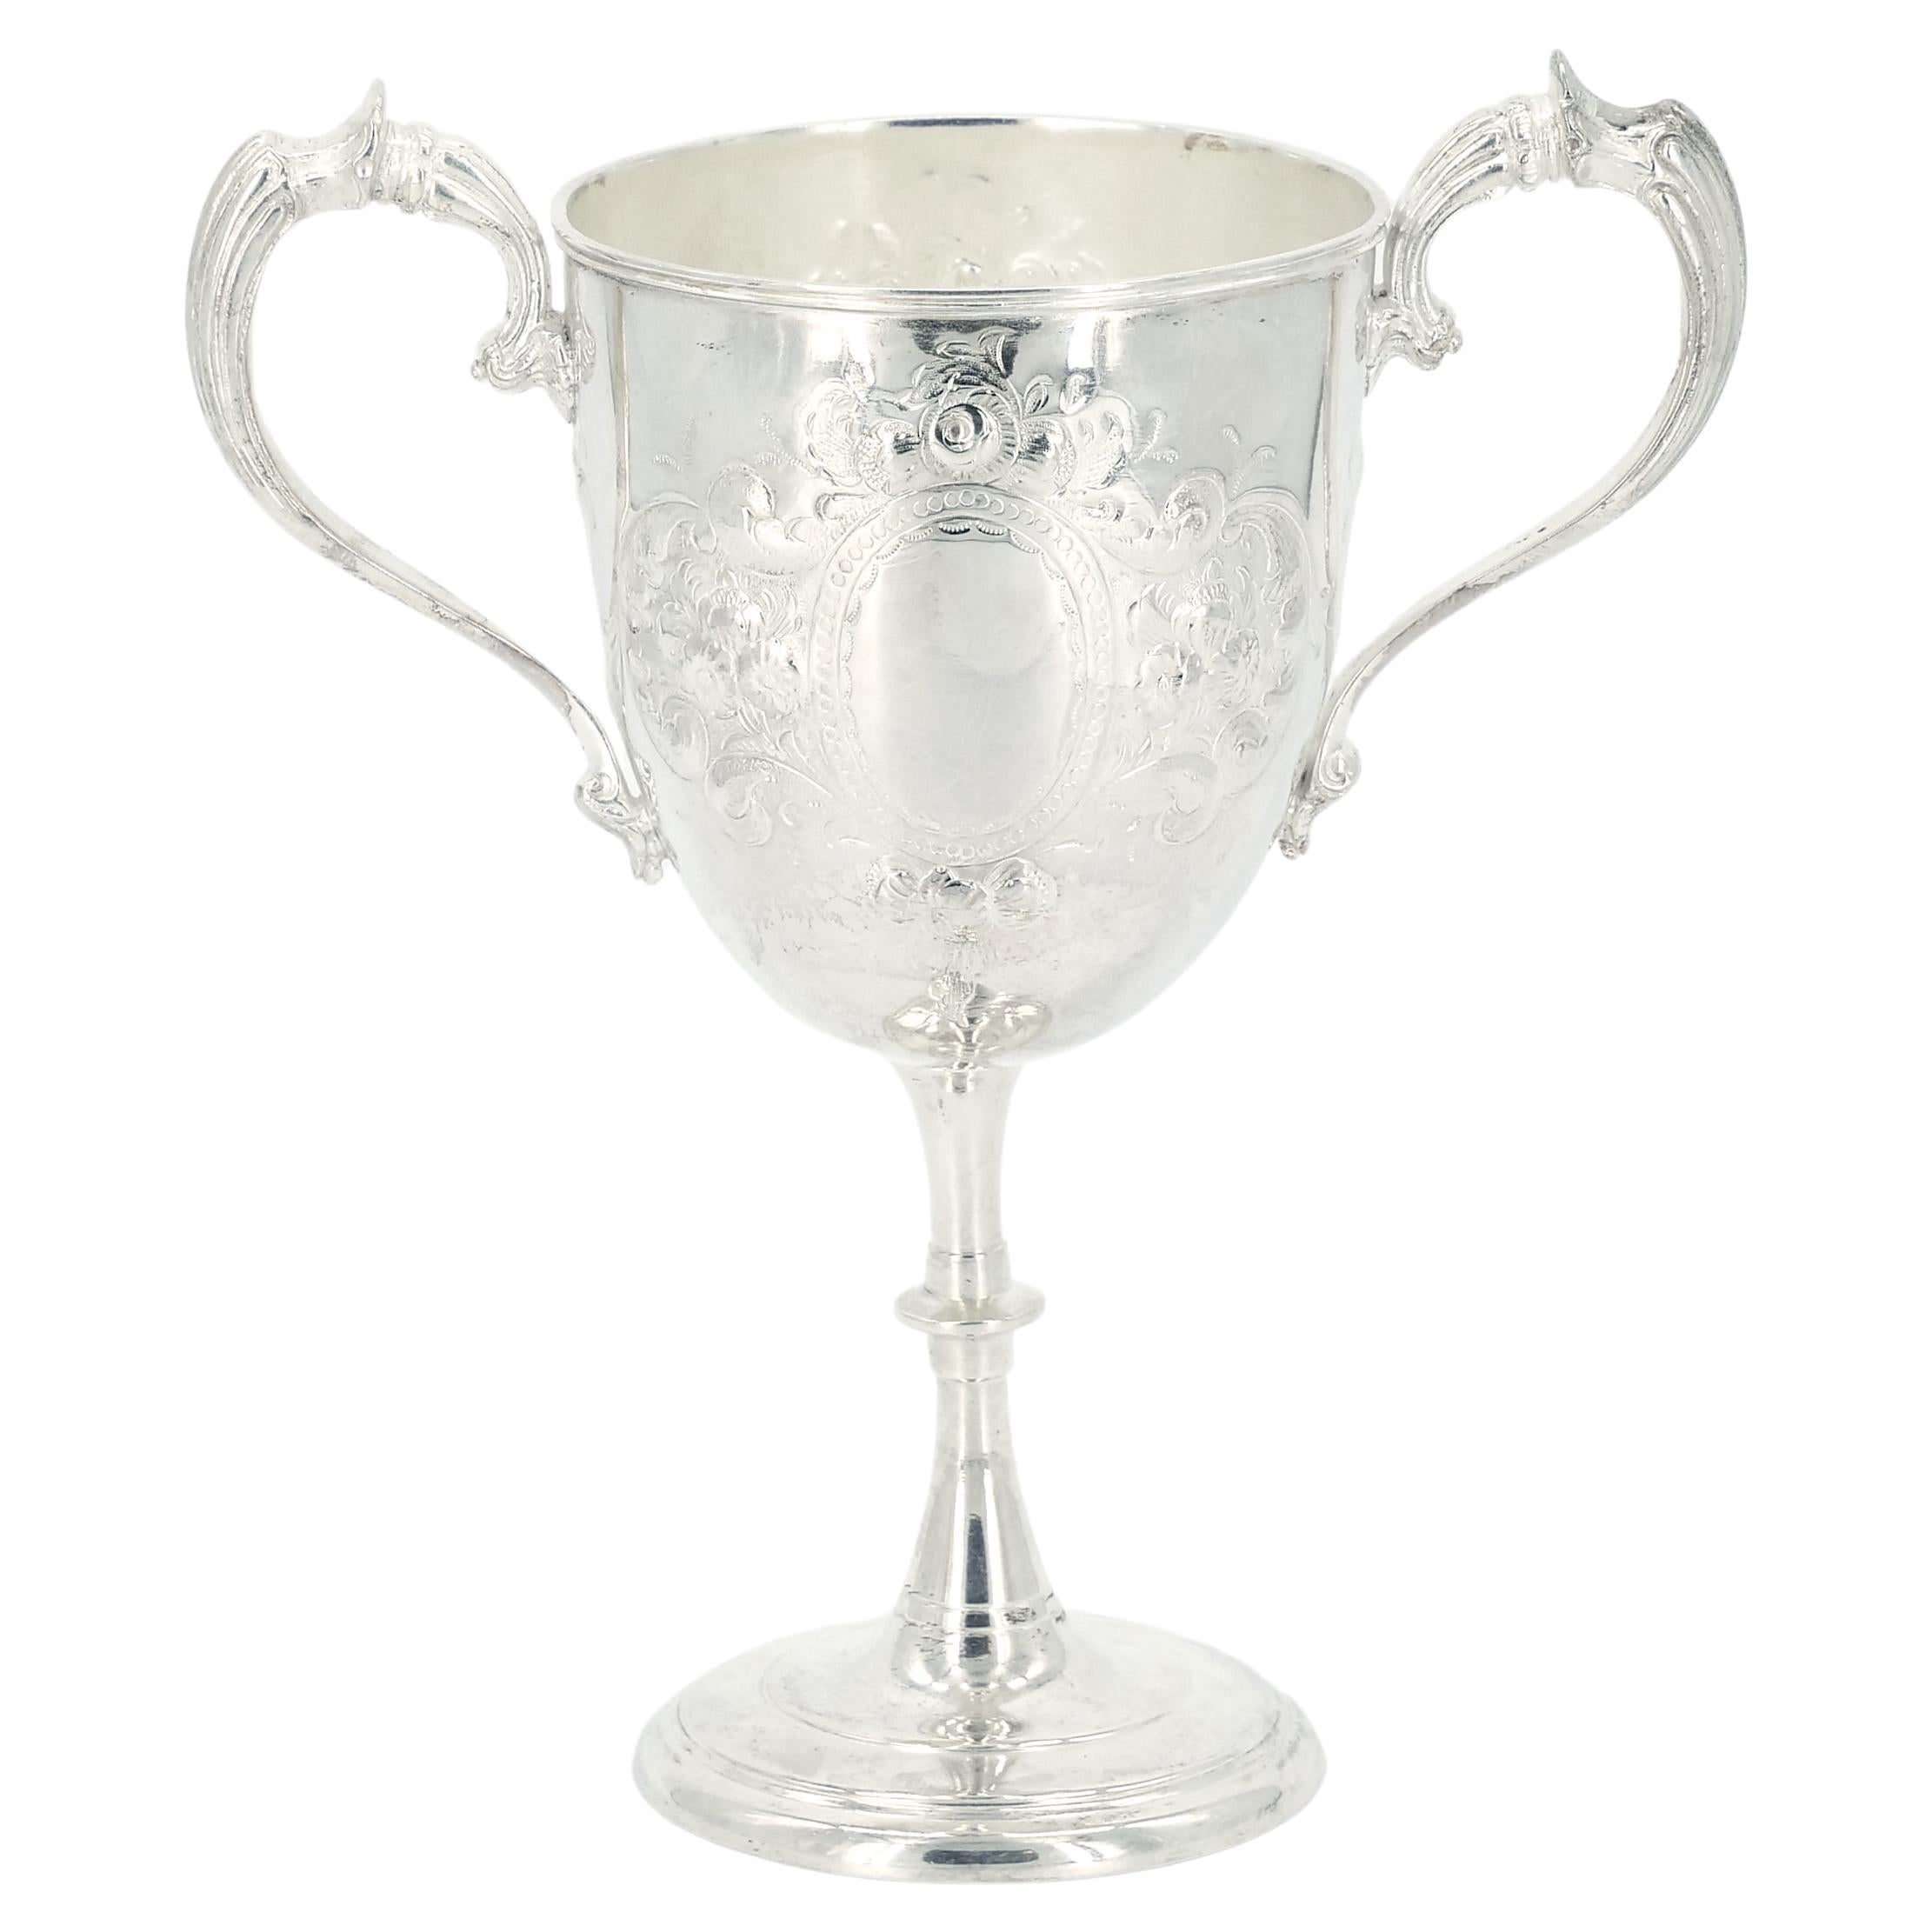 English Silver Plated Handled Trophy Cup Decorative Vase / Urn For Sale